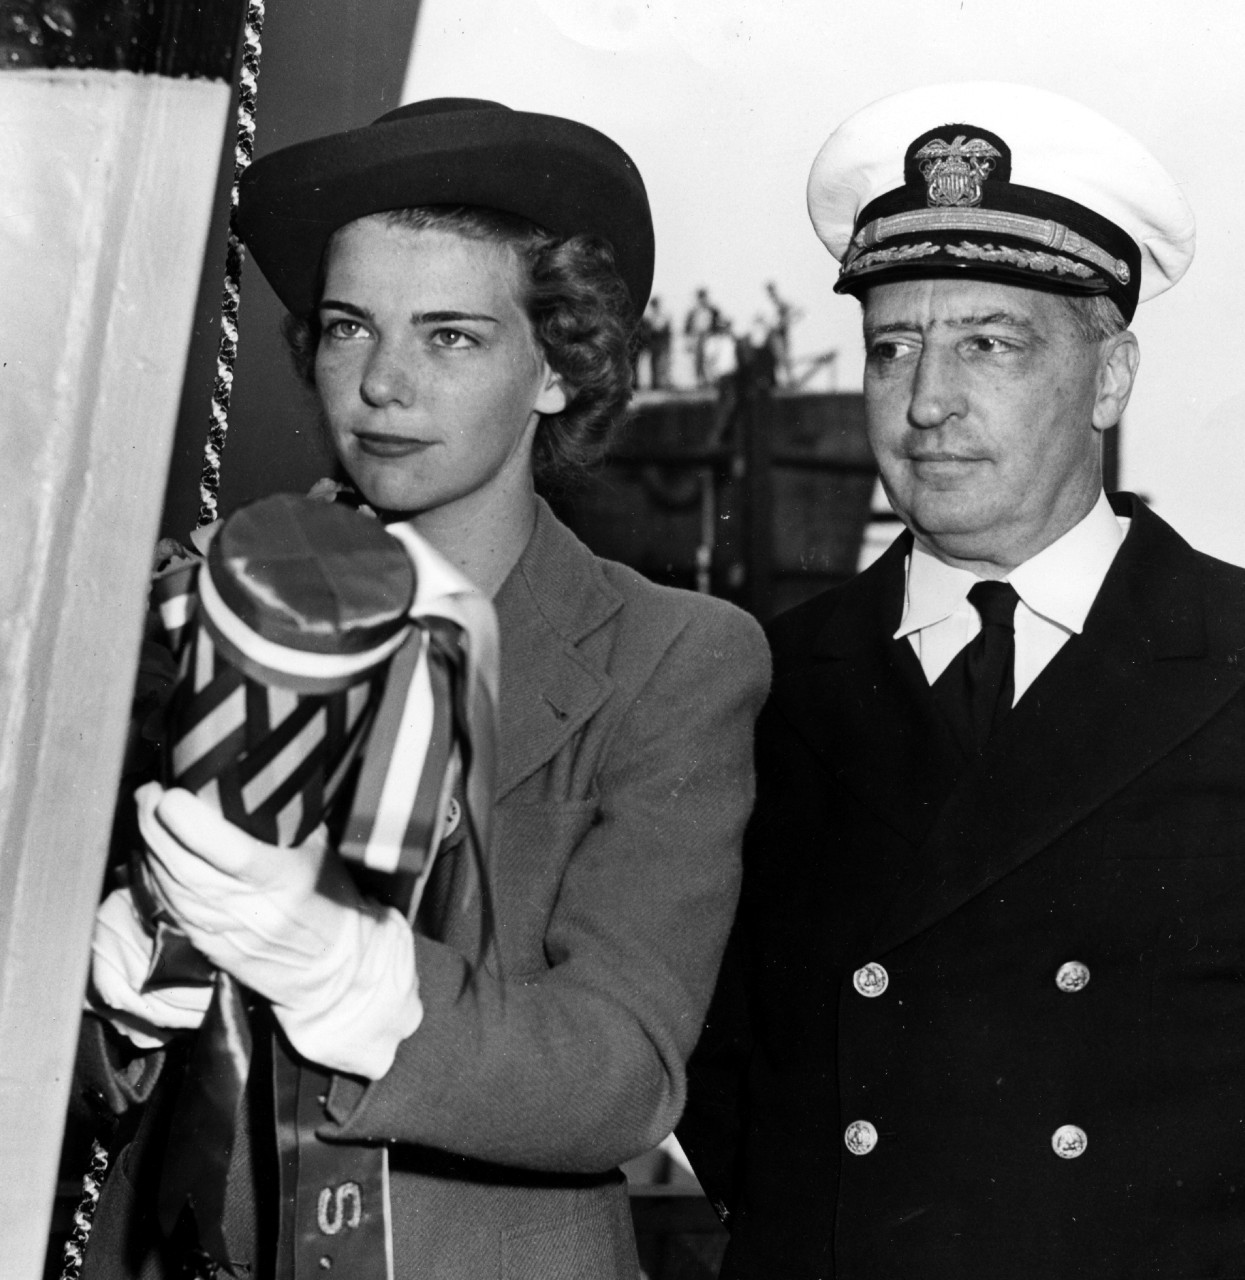 Miss Jeanne Lejeune Glennon (L), holds a bottle of Great Western Reserve Champagne, preparing to christen the ship named for her late grandfather, while Capt. James B. Glennon, her father, looks on (R), 26 August 1942. (U.S. Navy Bureau of Ships Photograph BS-34724, National Archives and Records Administration, Still Pictures Division, College Park, Md.)